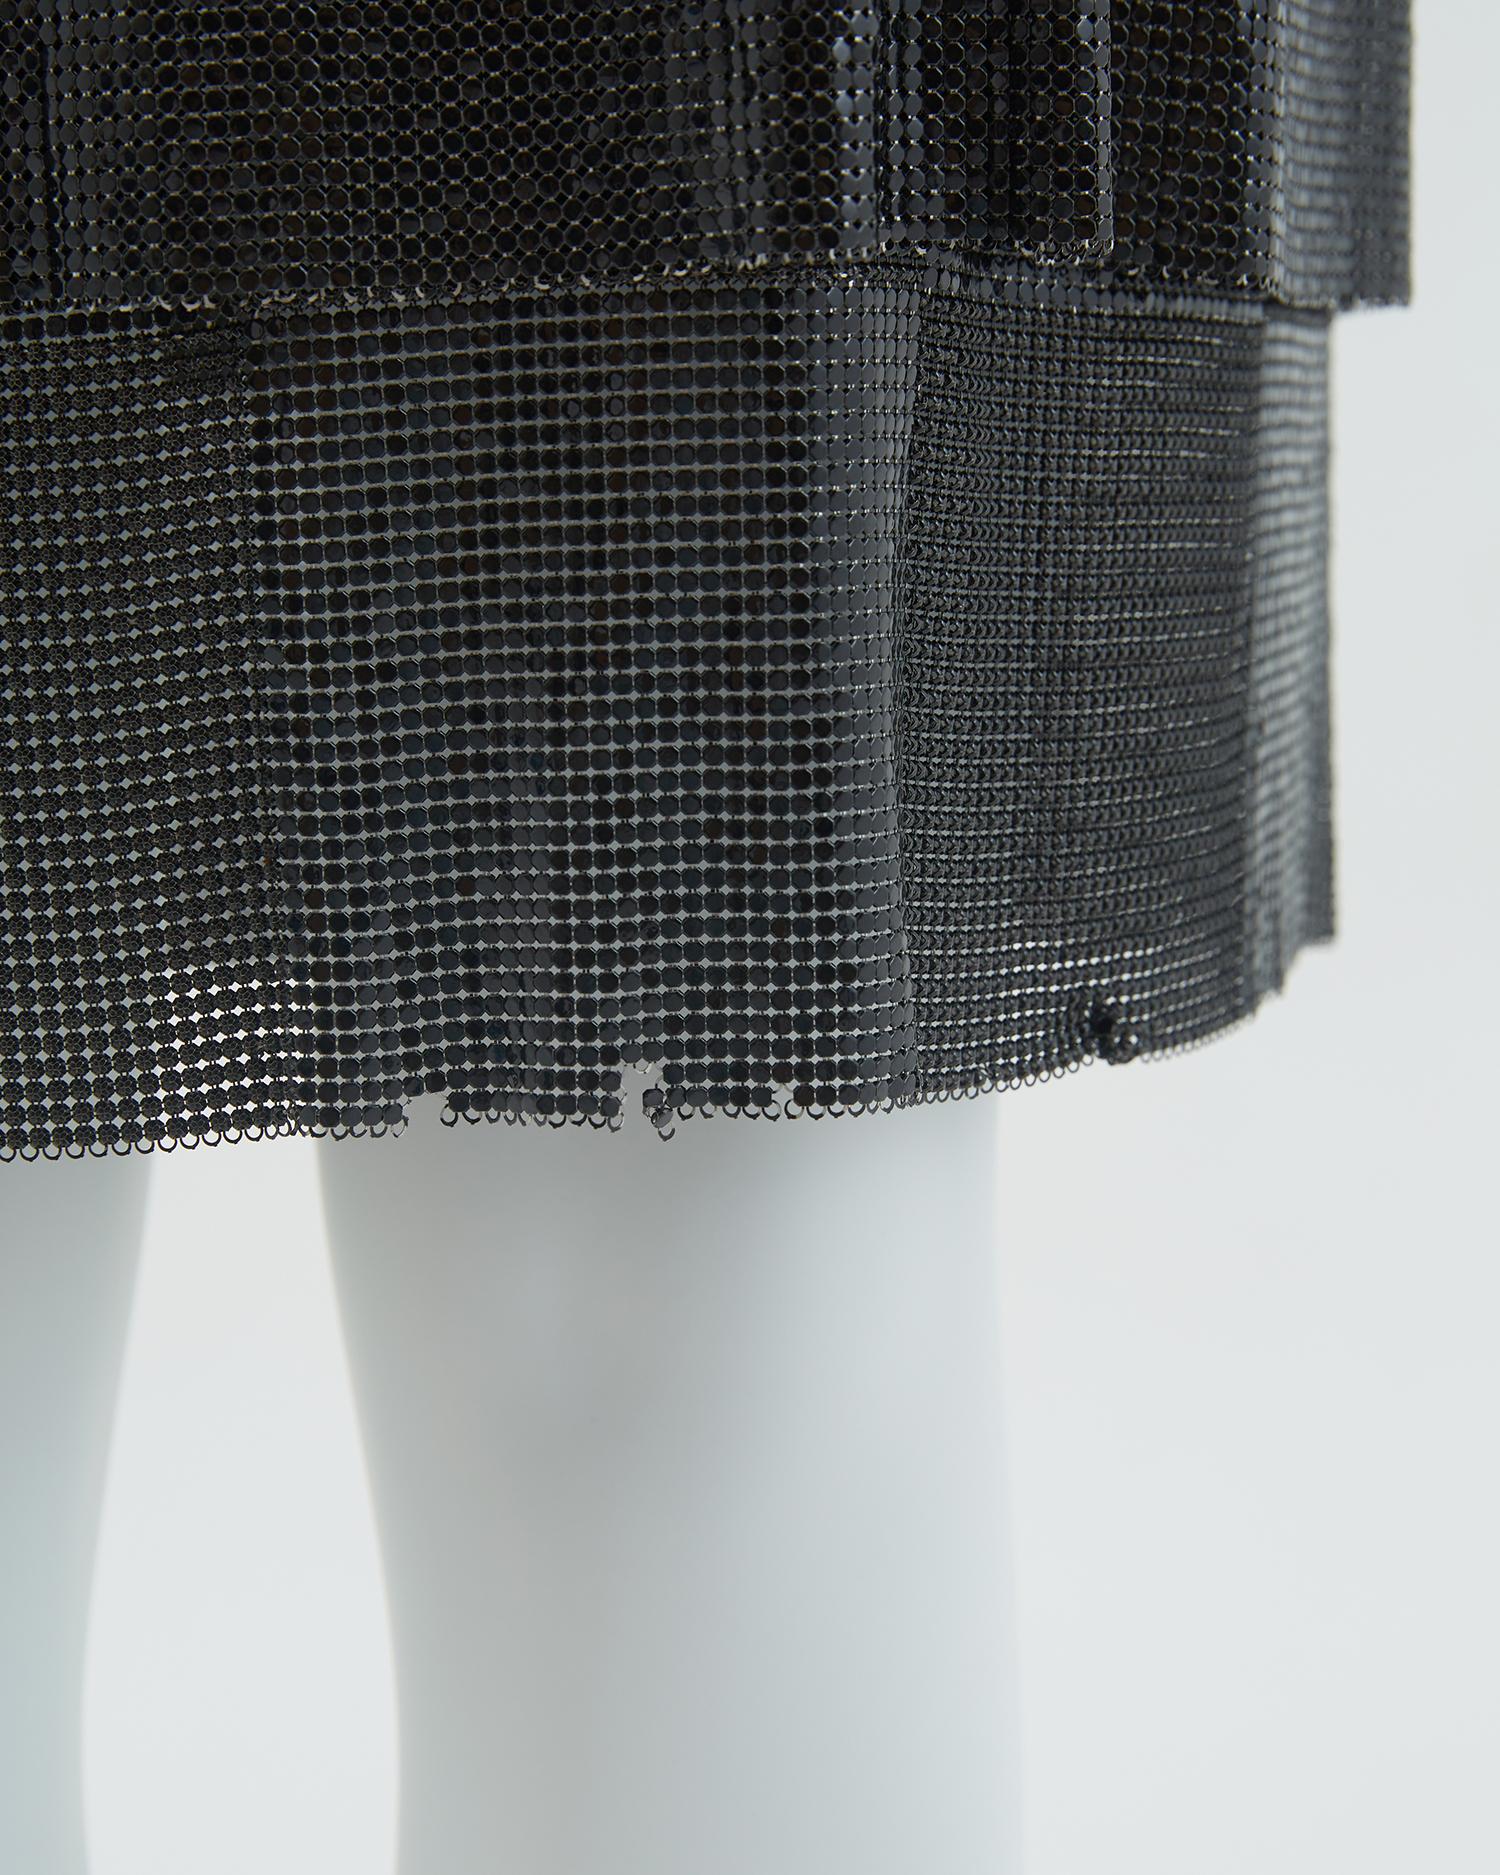 Gianni Versace F/W 1983 Black Oroton chainmail top and skirt set For Sale 15